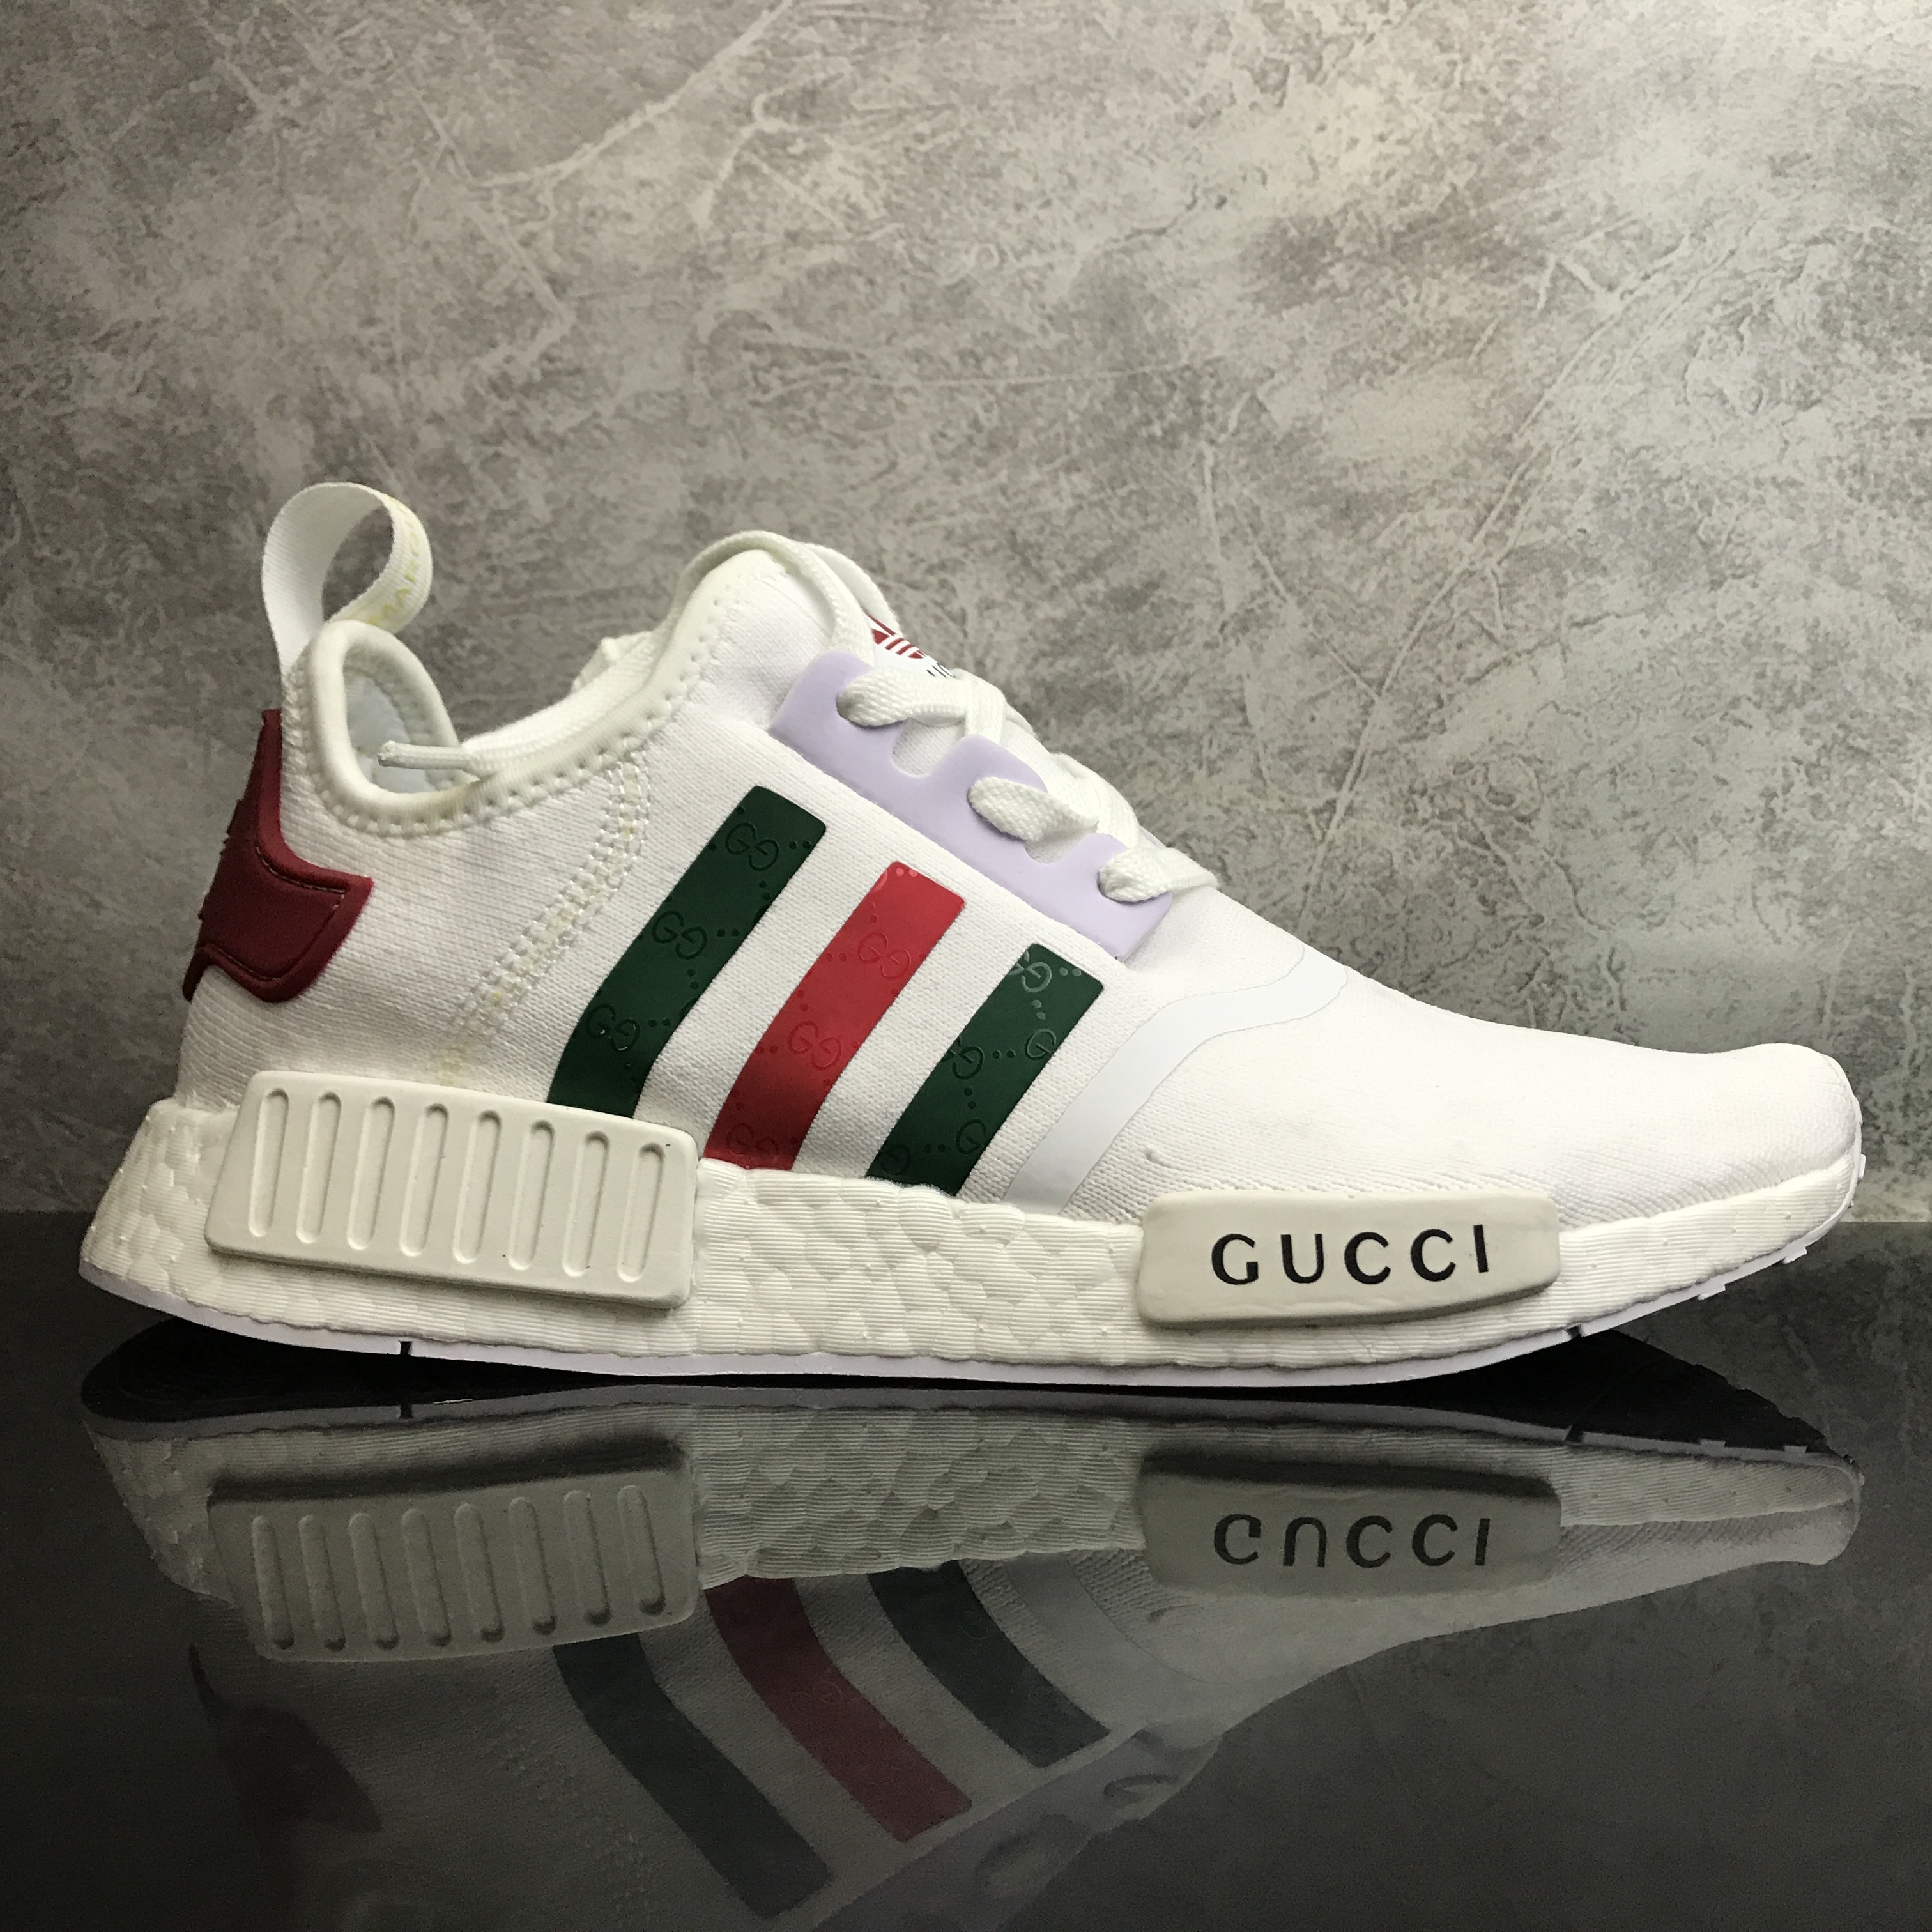 The New adidas NMD_R1 Olive Pink Looks Like It s From a Gucci Lab